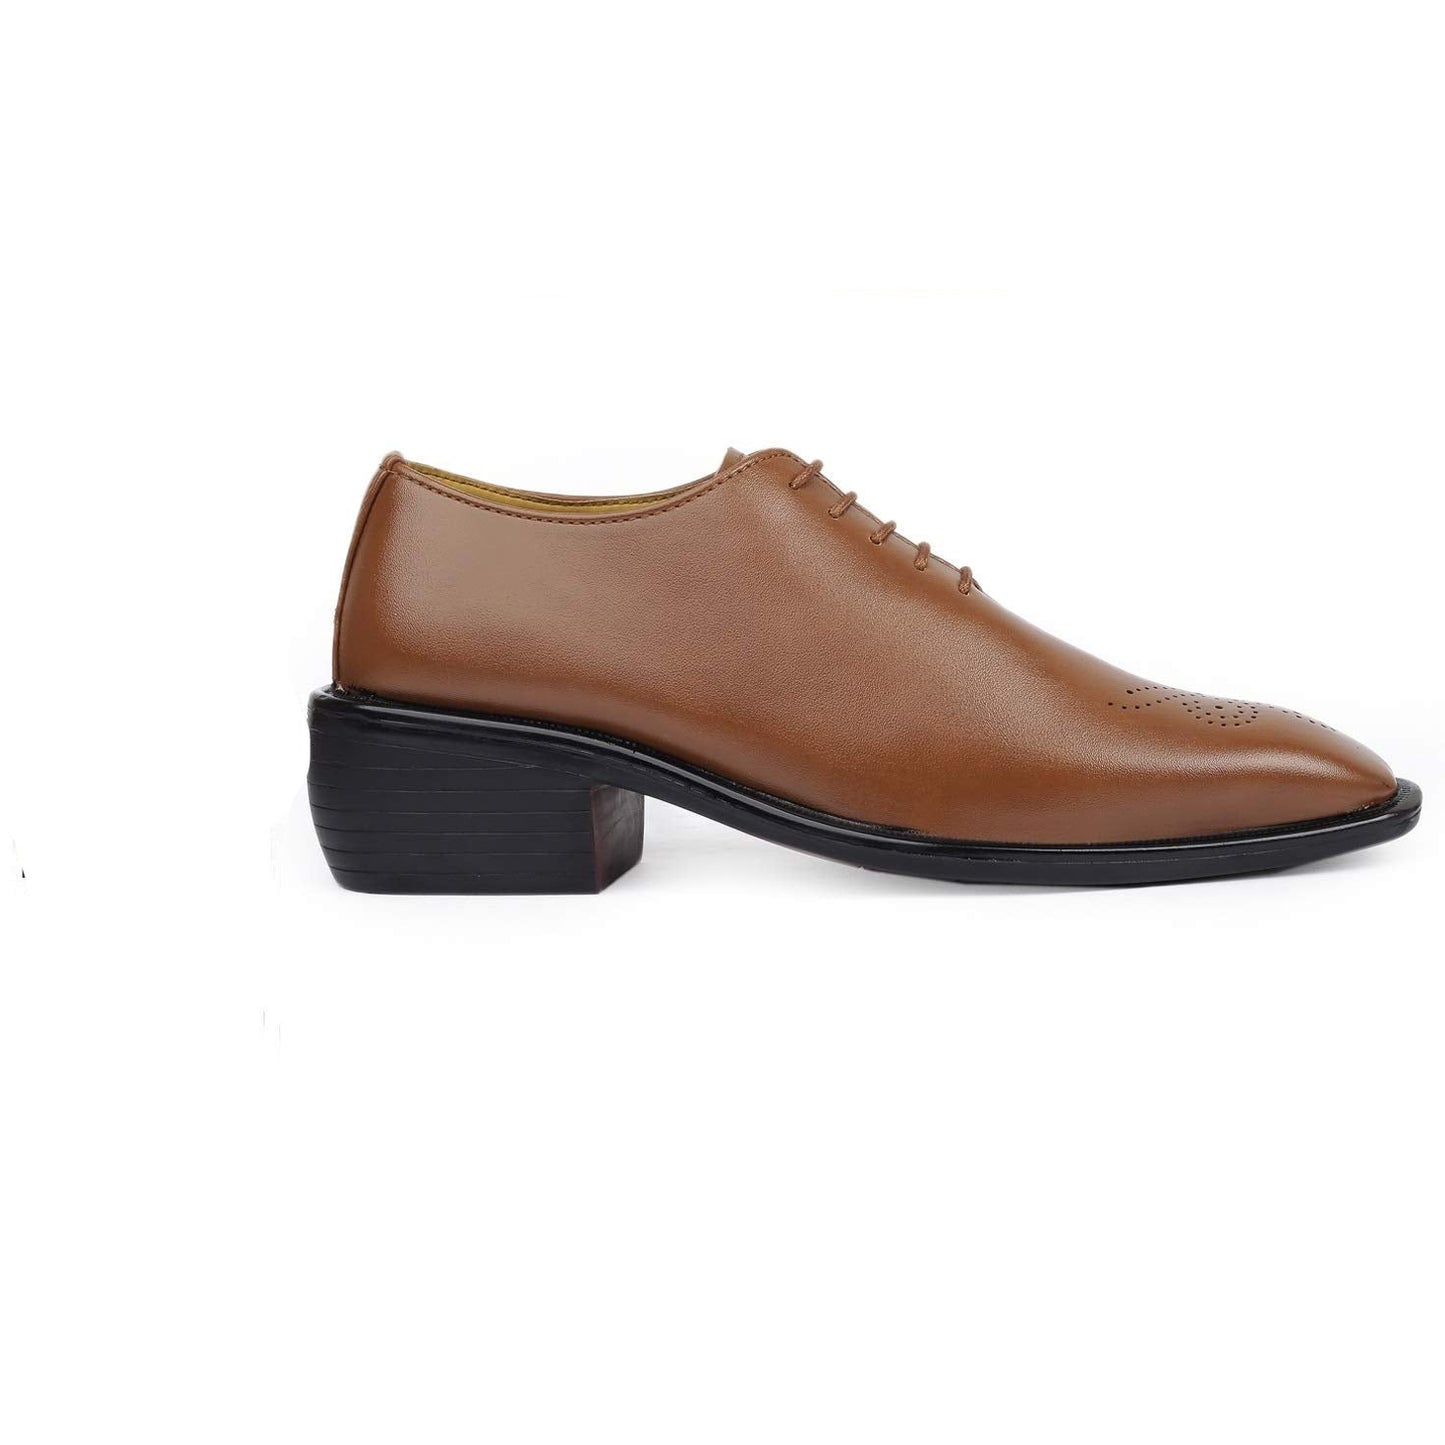 New Arrival Tan Height Increasing Casual, Formal And Party Wear Shoes-JonasParamount